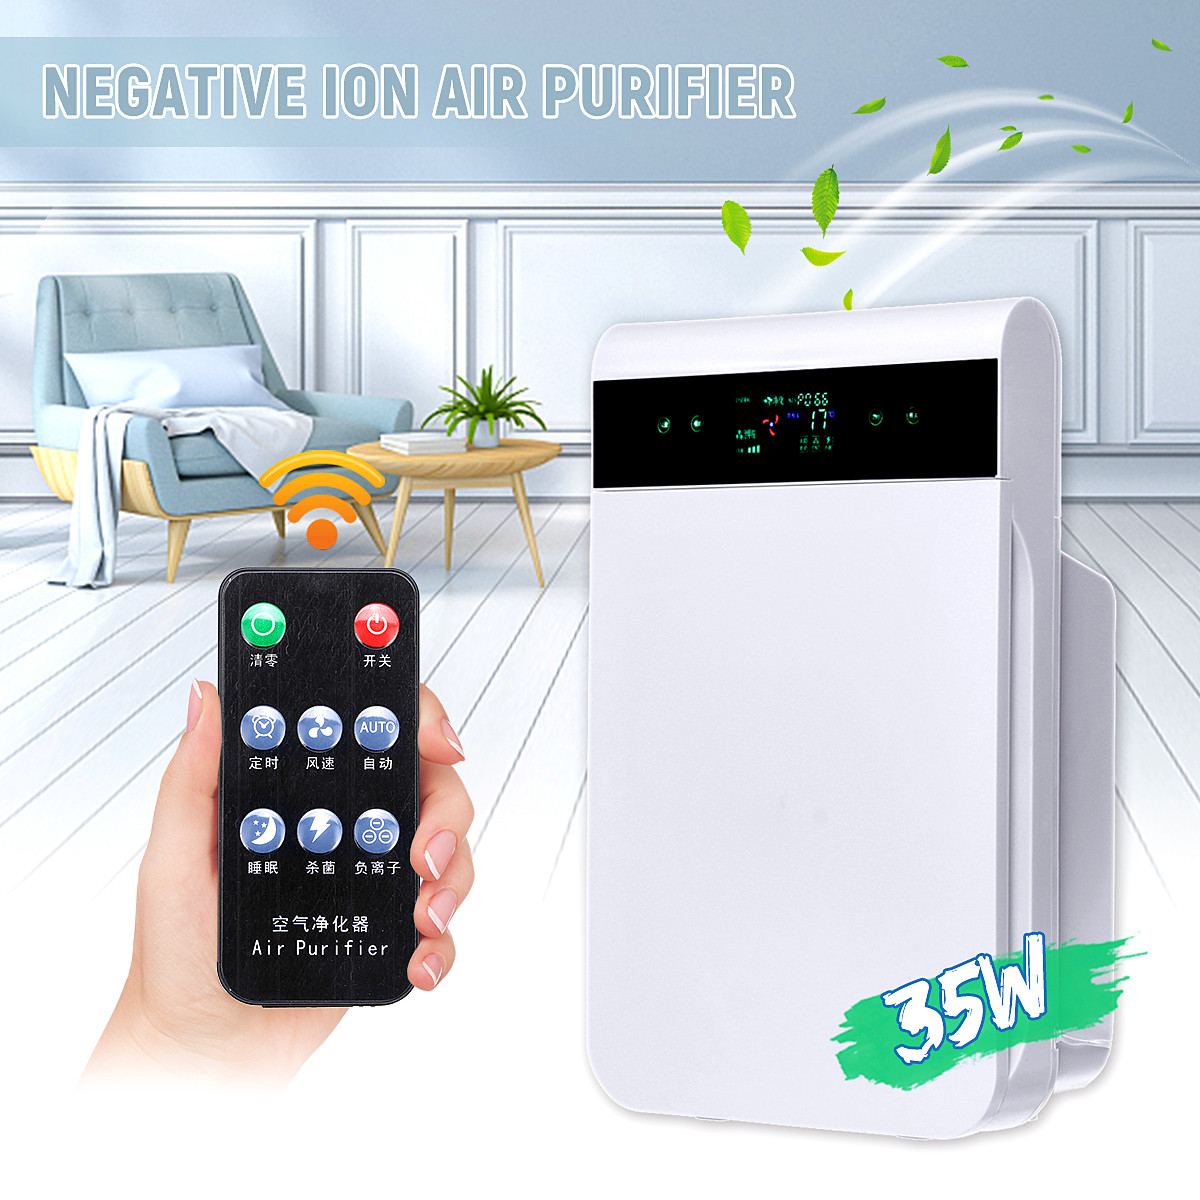 35W Negative Ion Anion Air Purifier Smart PM2.5 Removal